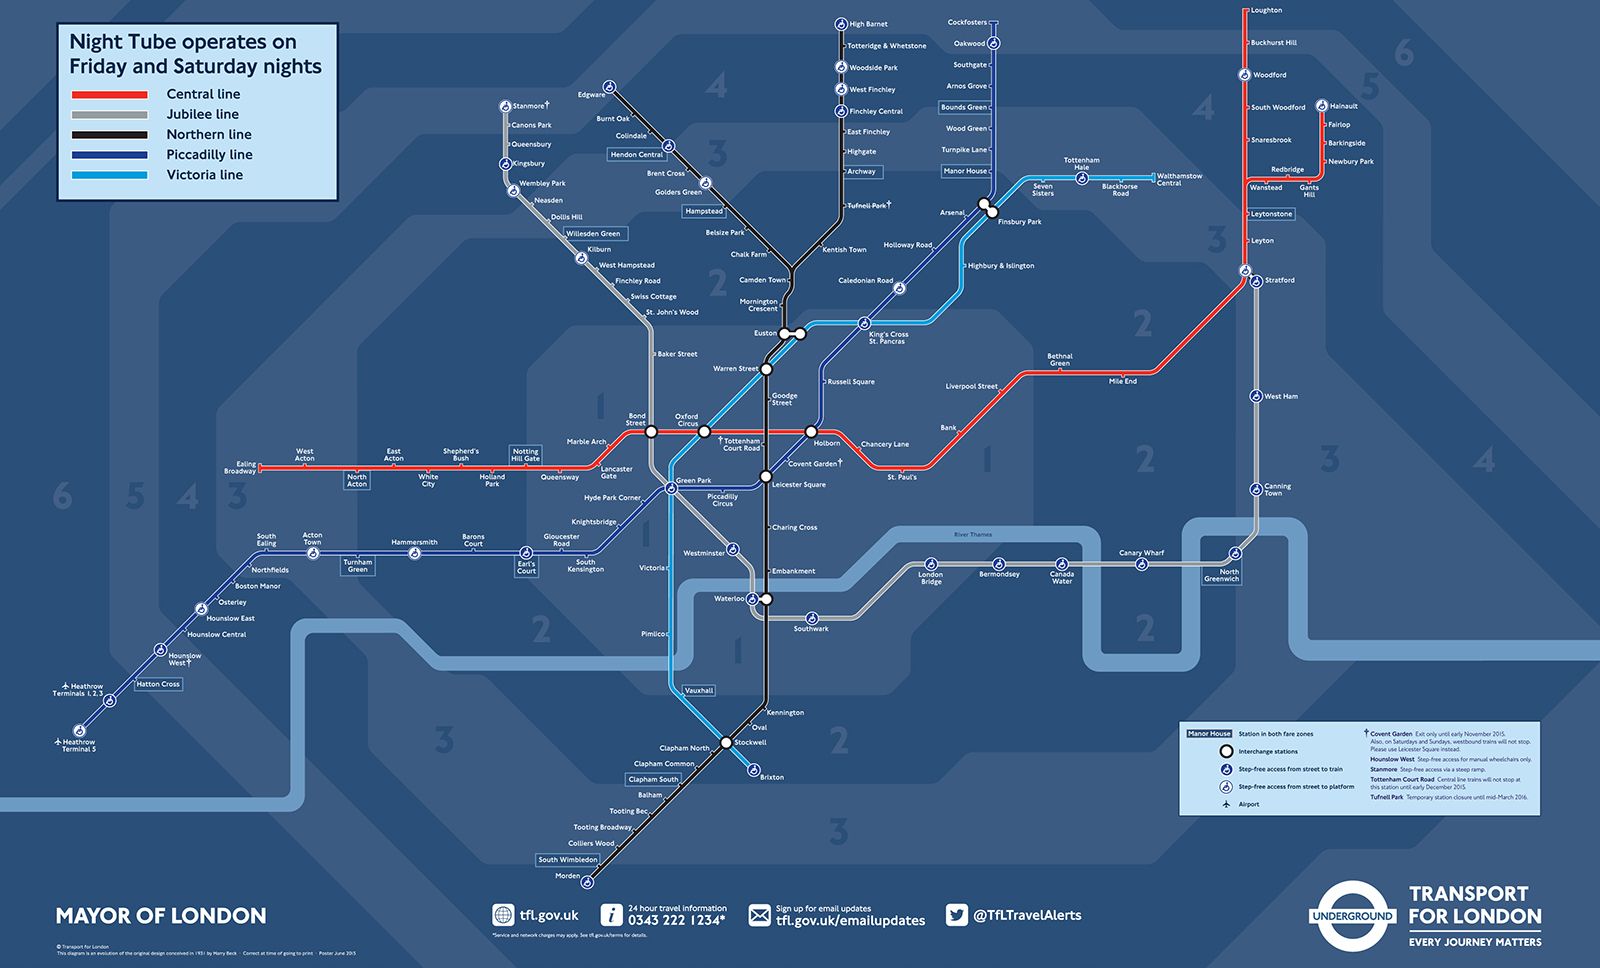 say goodbye to last train worries london night tube detailed by tfl image 1